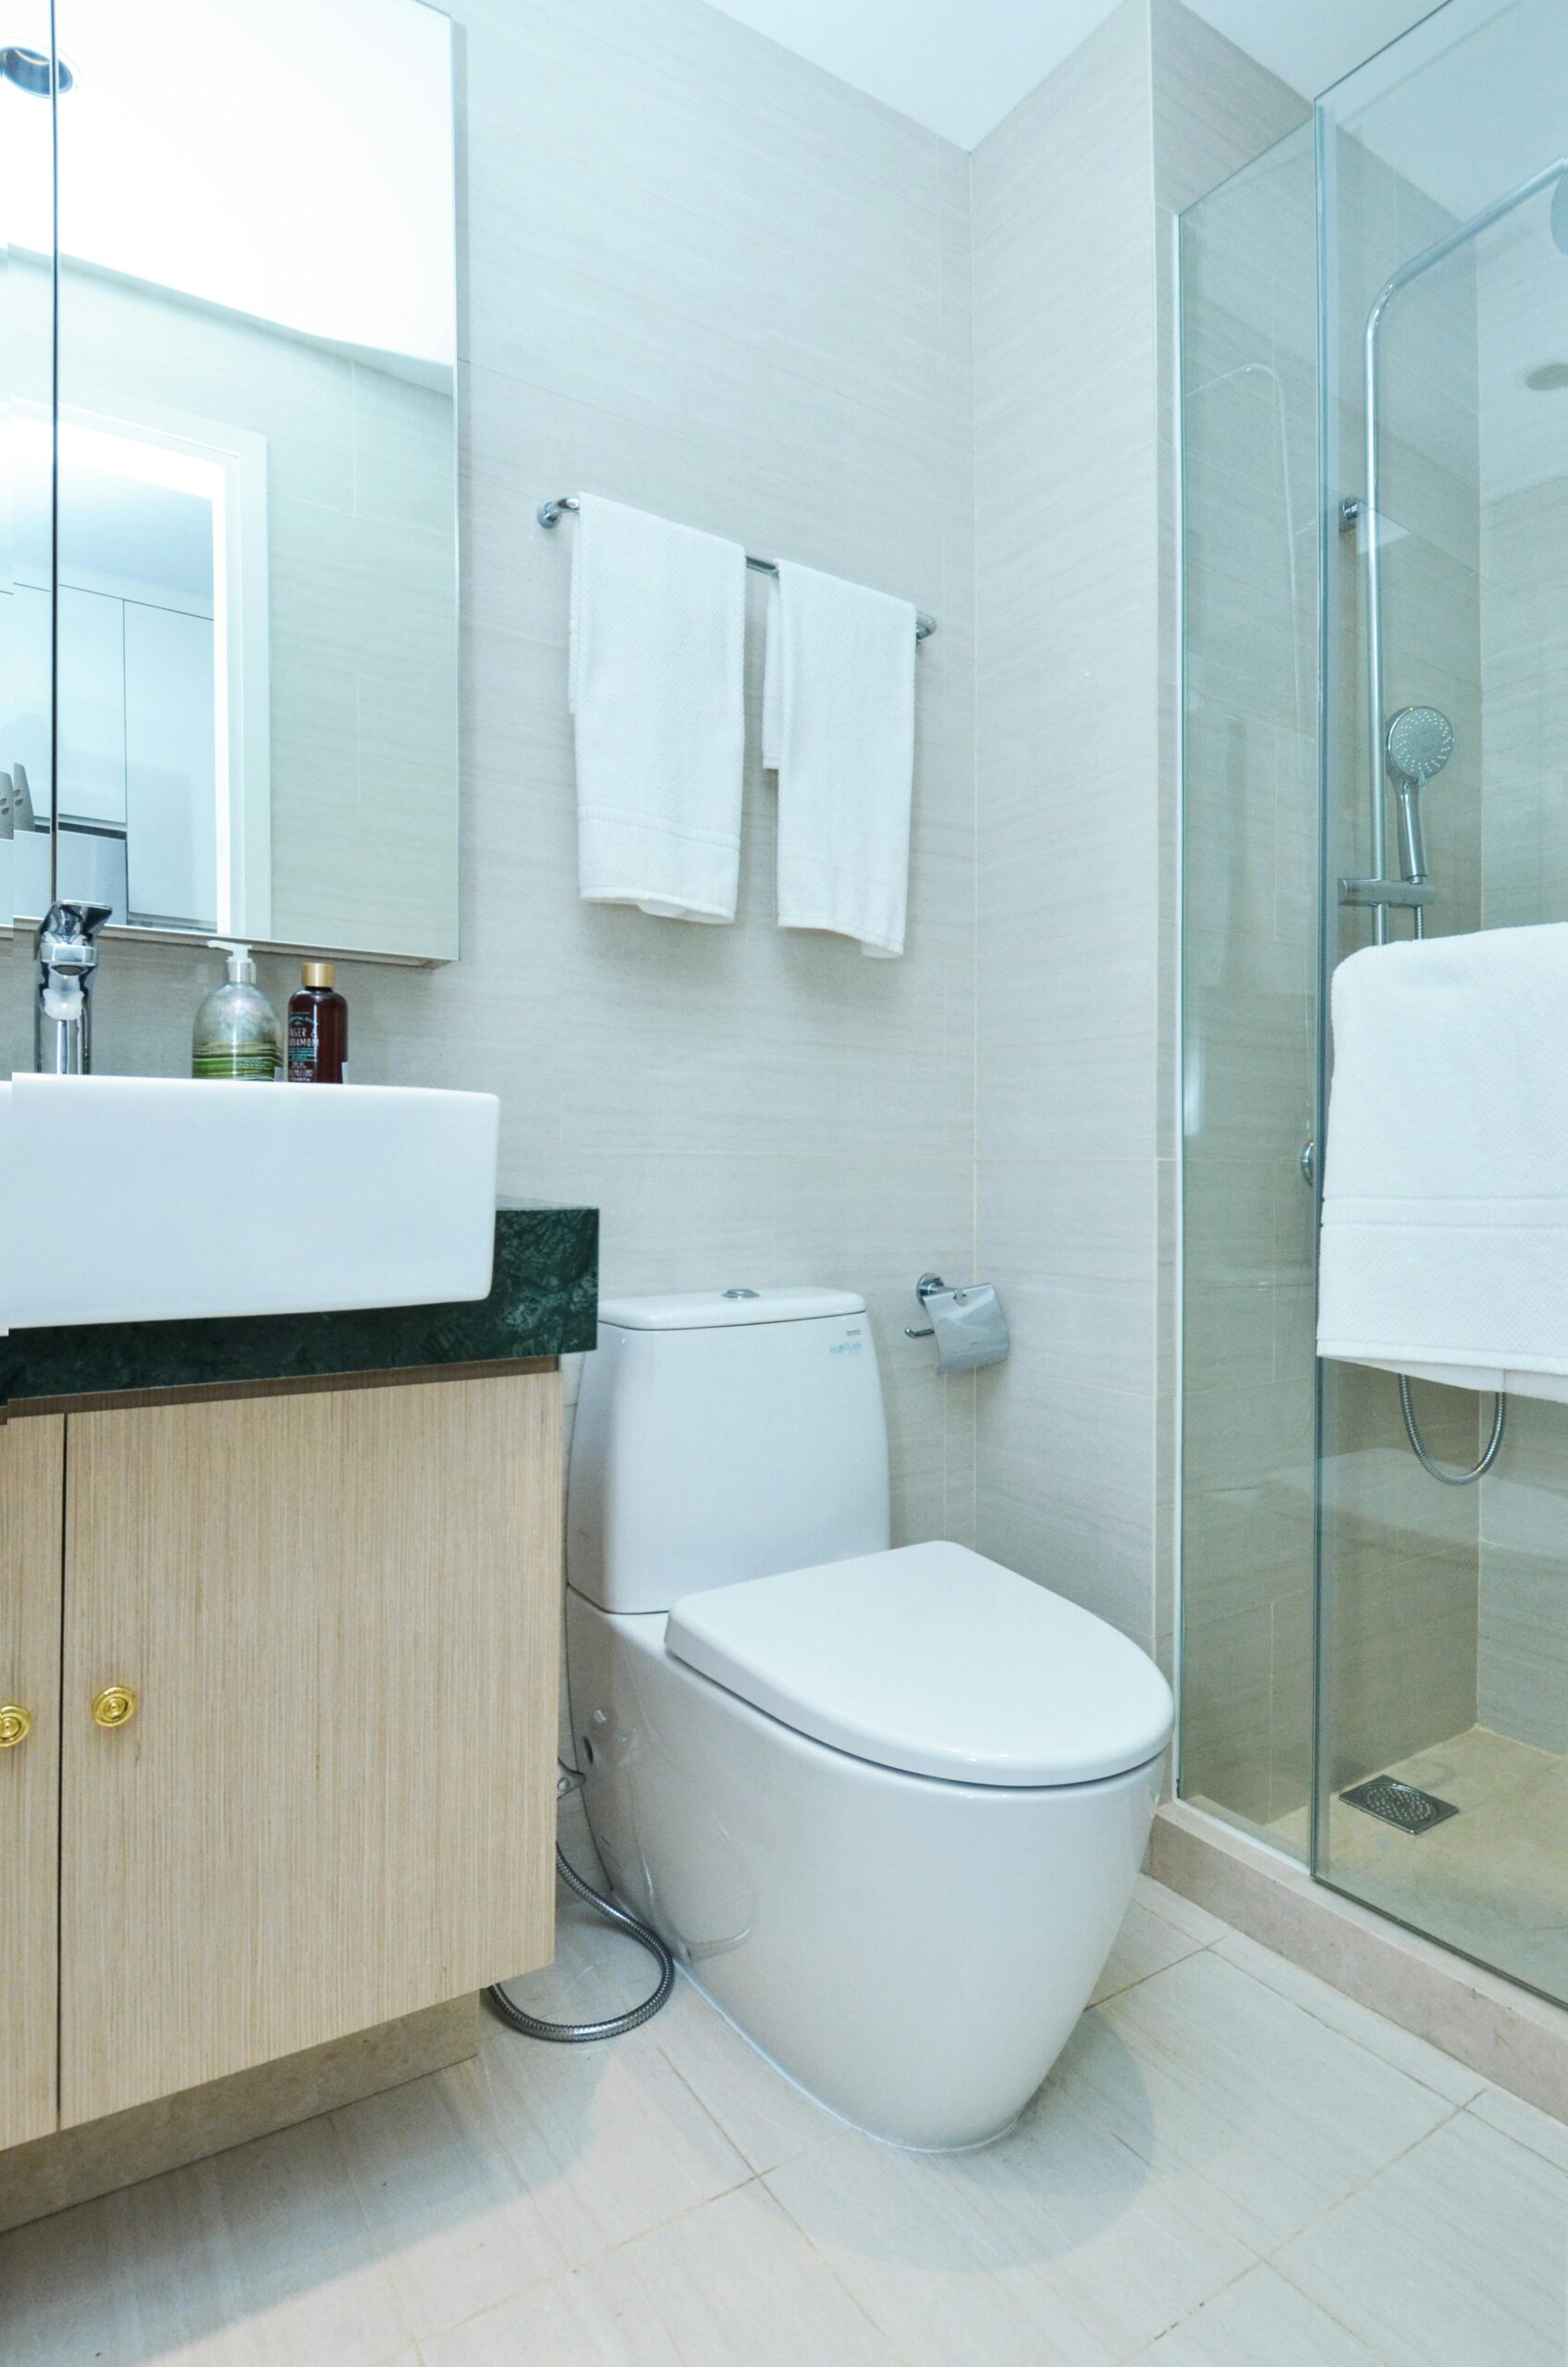 Top Styles and Features for Purchasing a Toilet